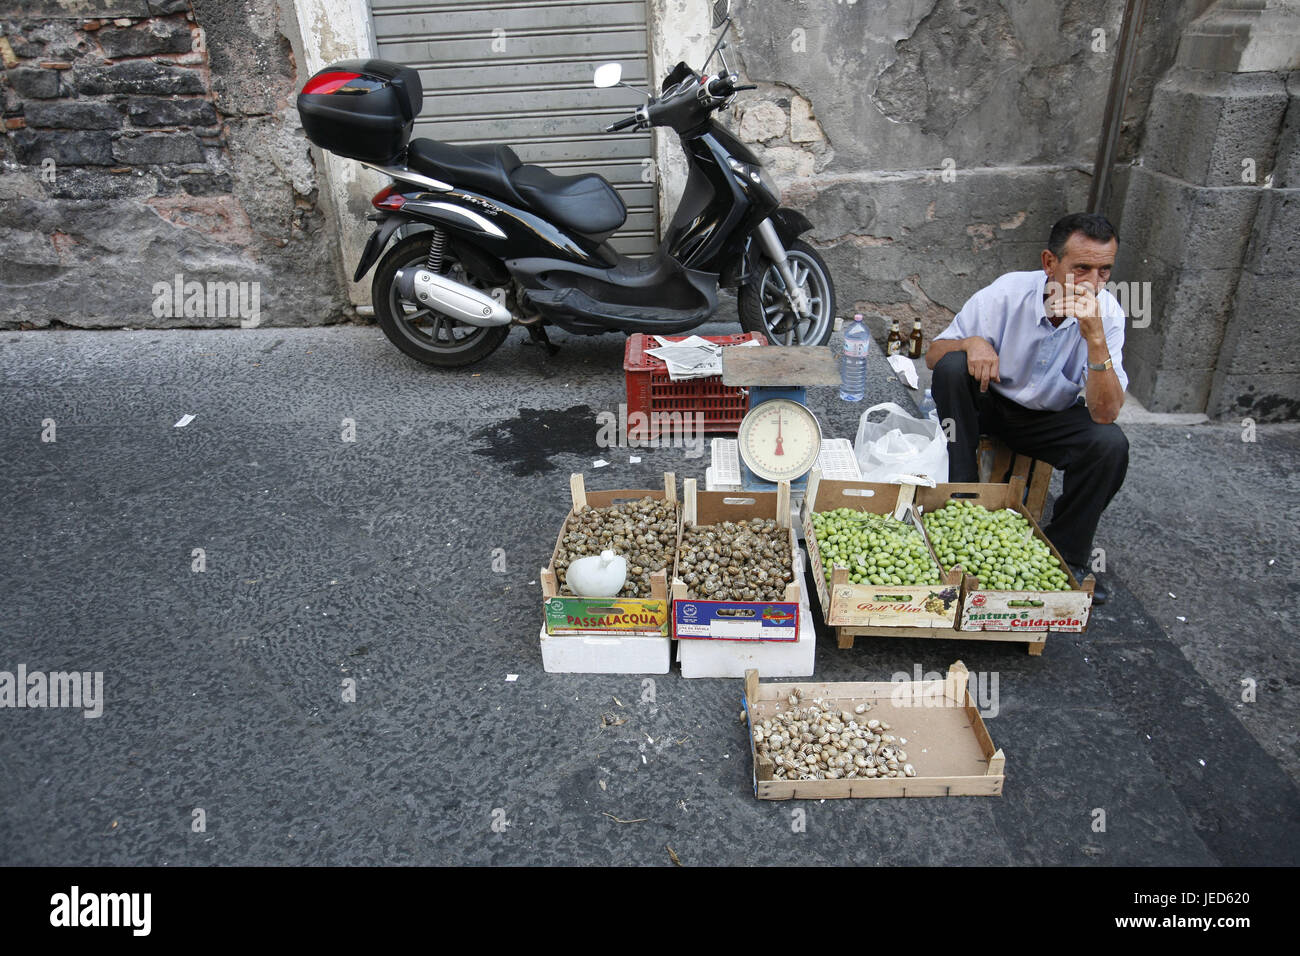 Italy, Sicily, Catania, street vendor, sales, fruits, no model release, Southern Europe, lane, food, vegetables, scales, dealer, man, sit, wait, economy, retail trade, motorbike, Stock Photo